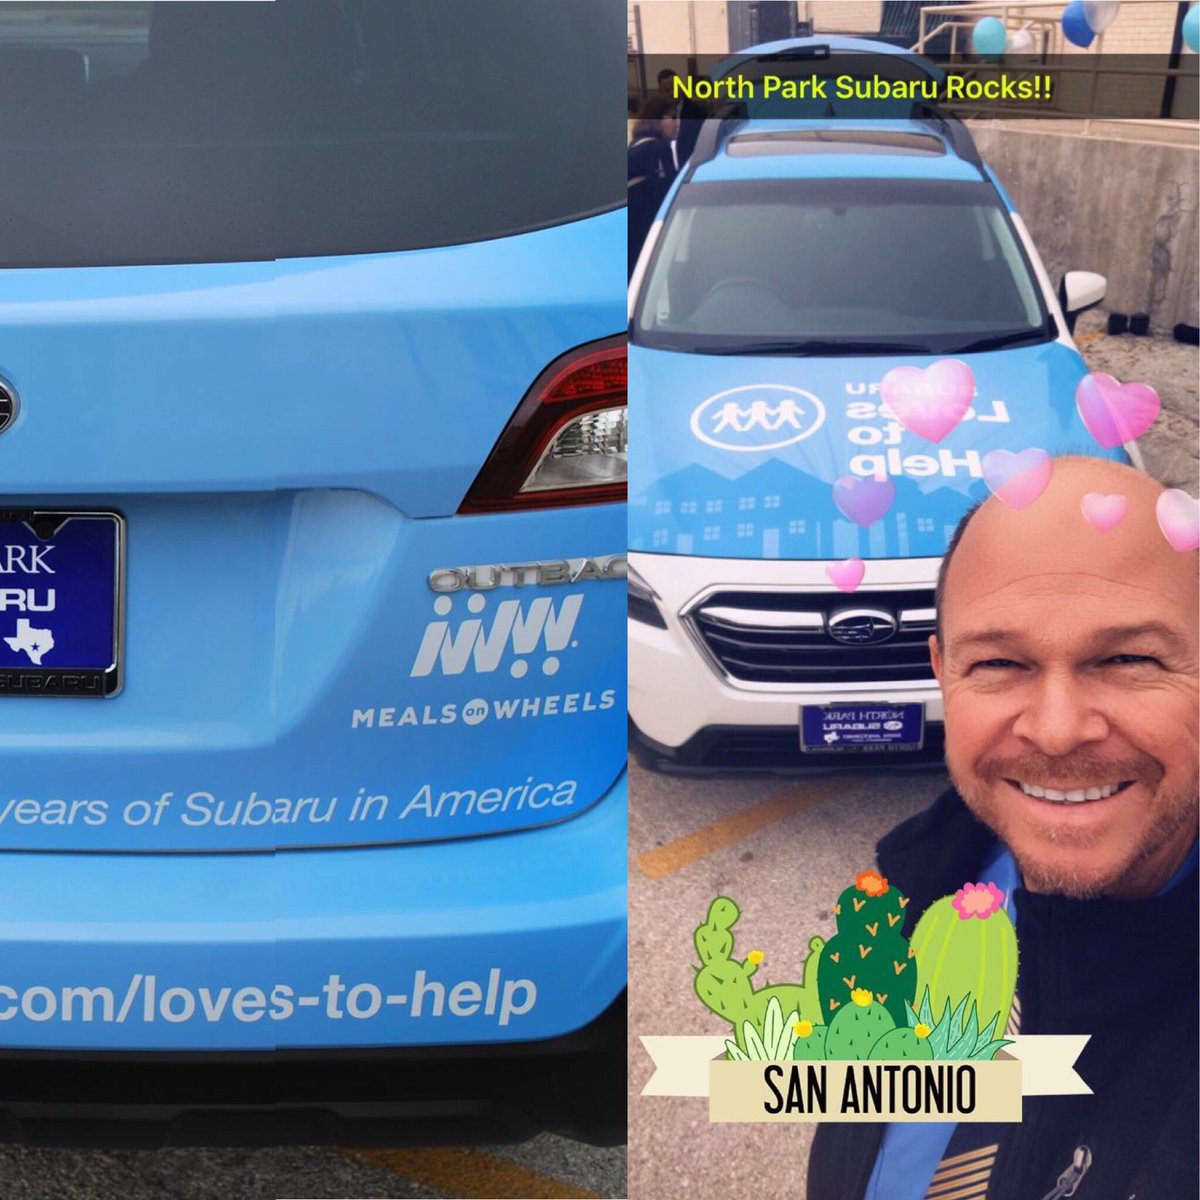 To celebrate Subaru’s 50 years in America, 50 new Outbacks are being donated to 50 chapters of #mealsonwheels across the U.S.! #SubaruLovesToHelp #Snap